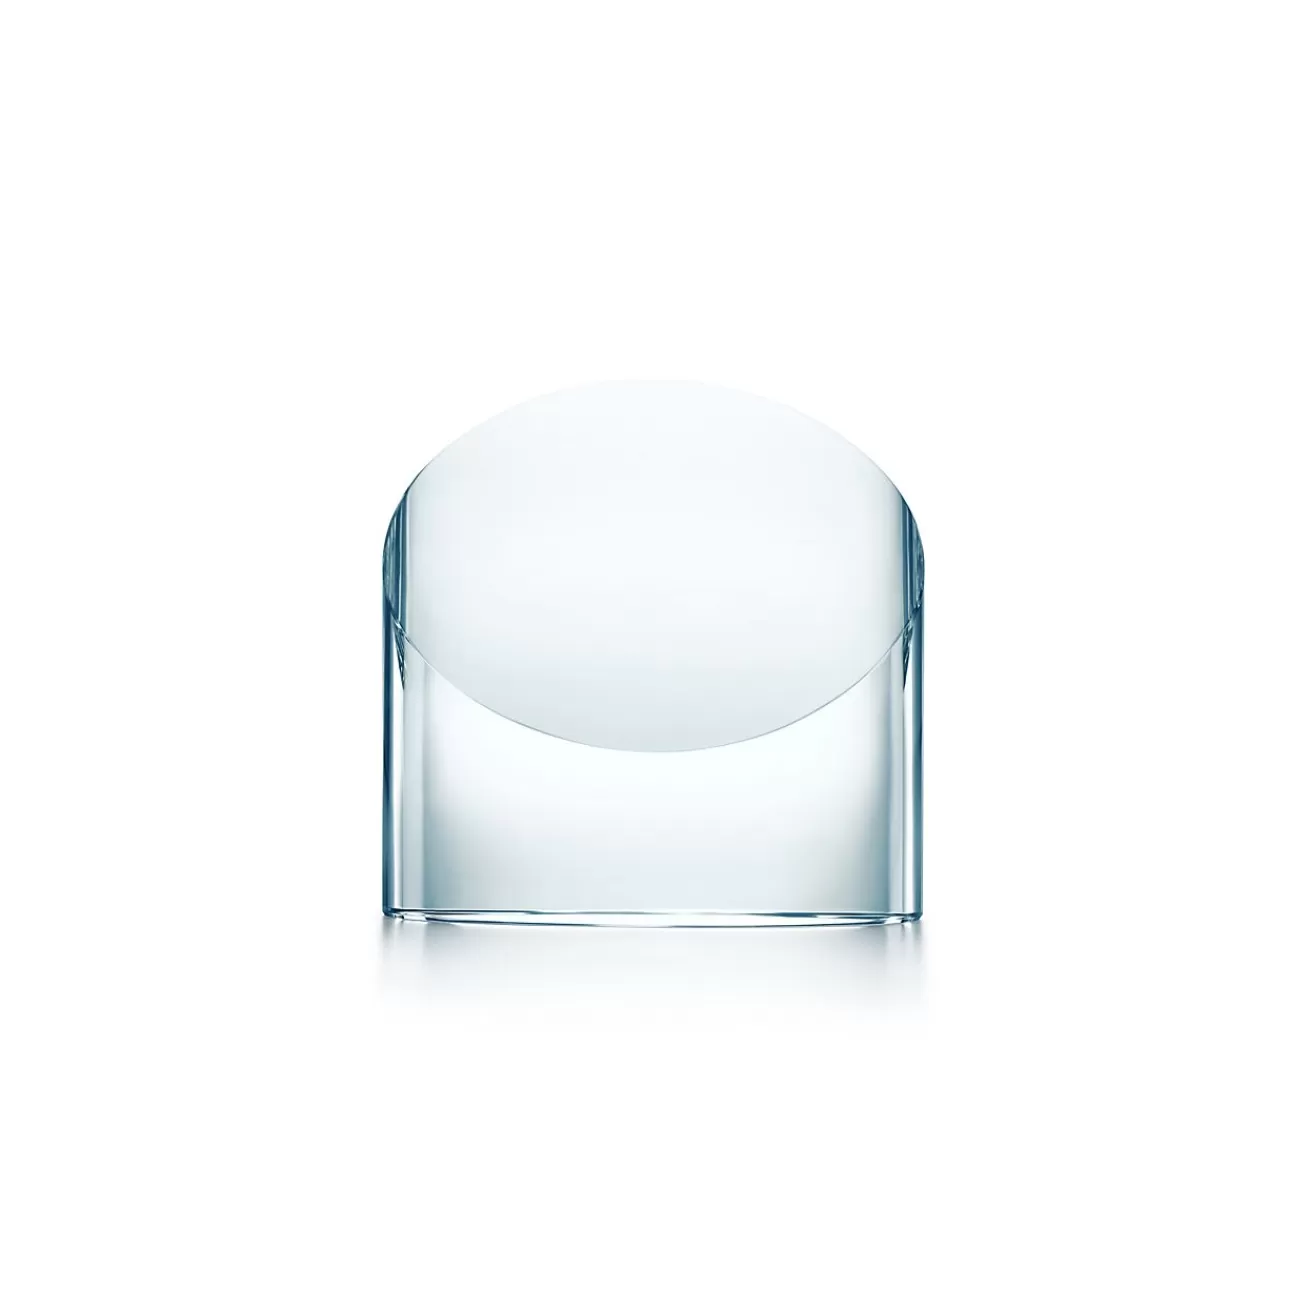 Tiffany & Co. Slant-cut oval award in glass, 4.5" high. | ^ Business Gifts